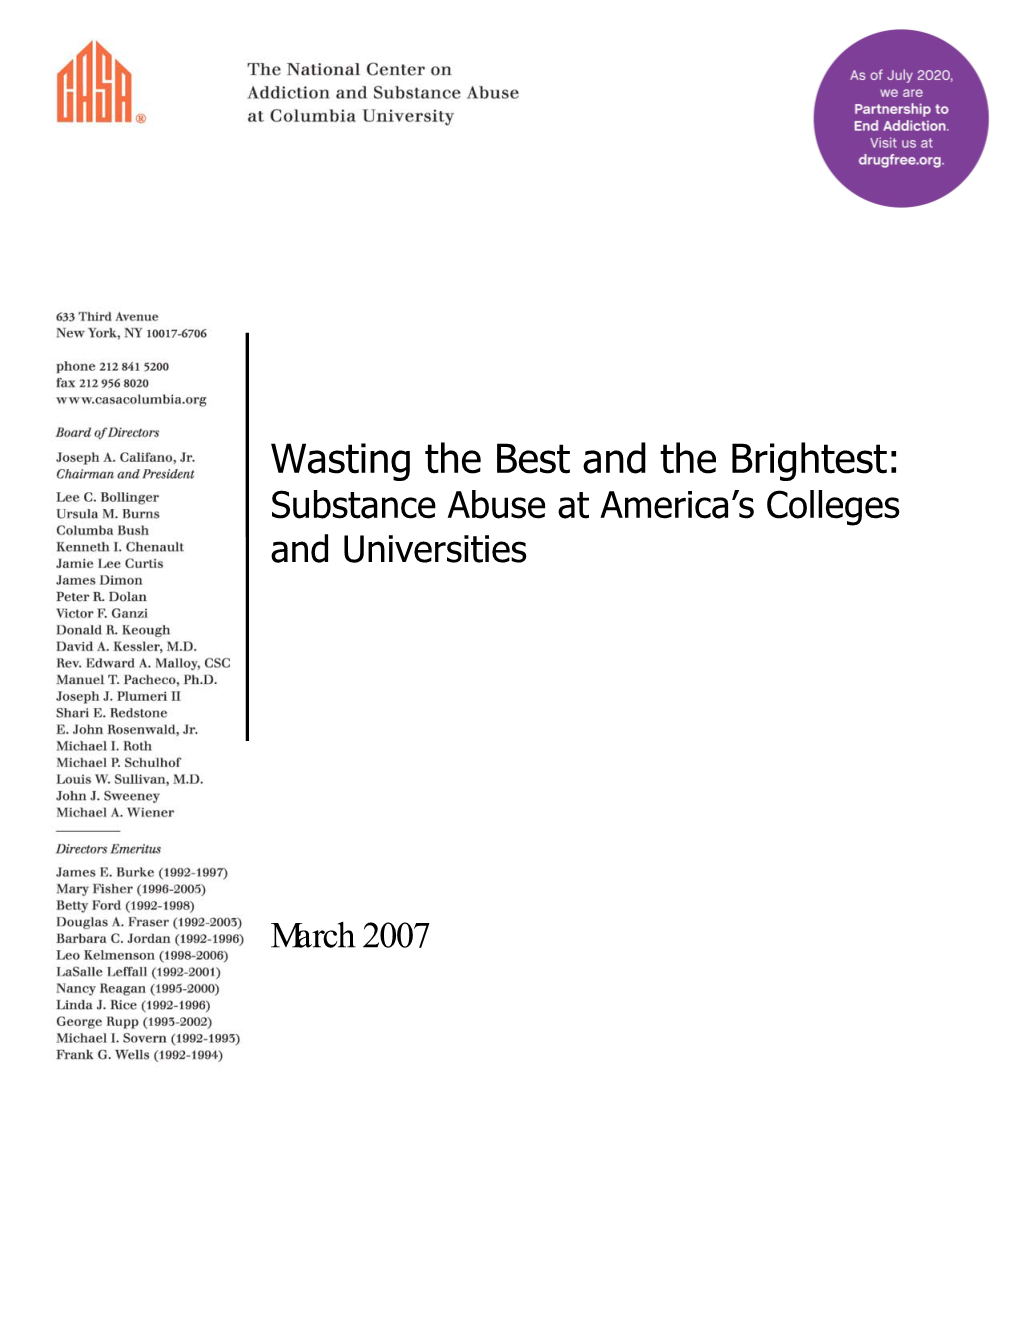 Wasting the Best and the Brightest: Substance Abuse at America’S Colleges and Universities